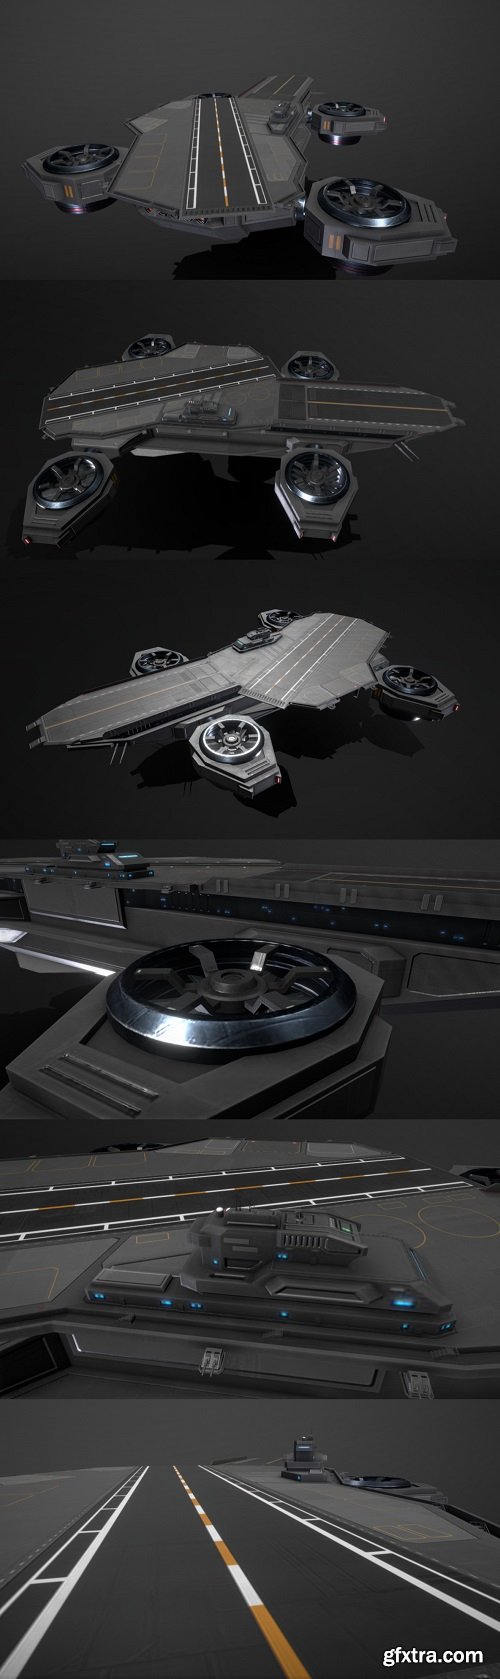 Scifi Flying Aircraft Carrier